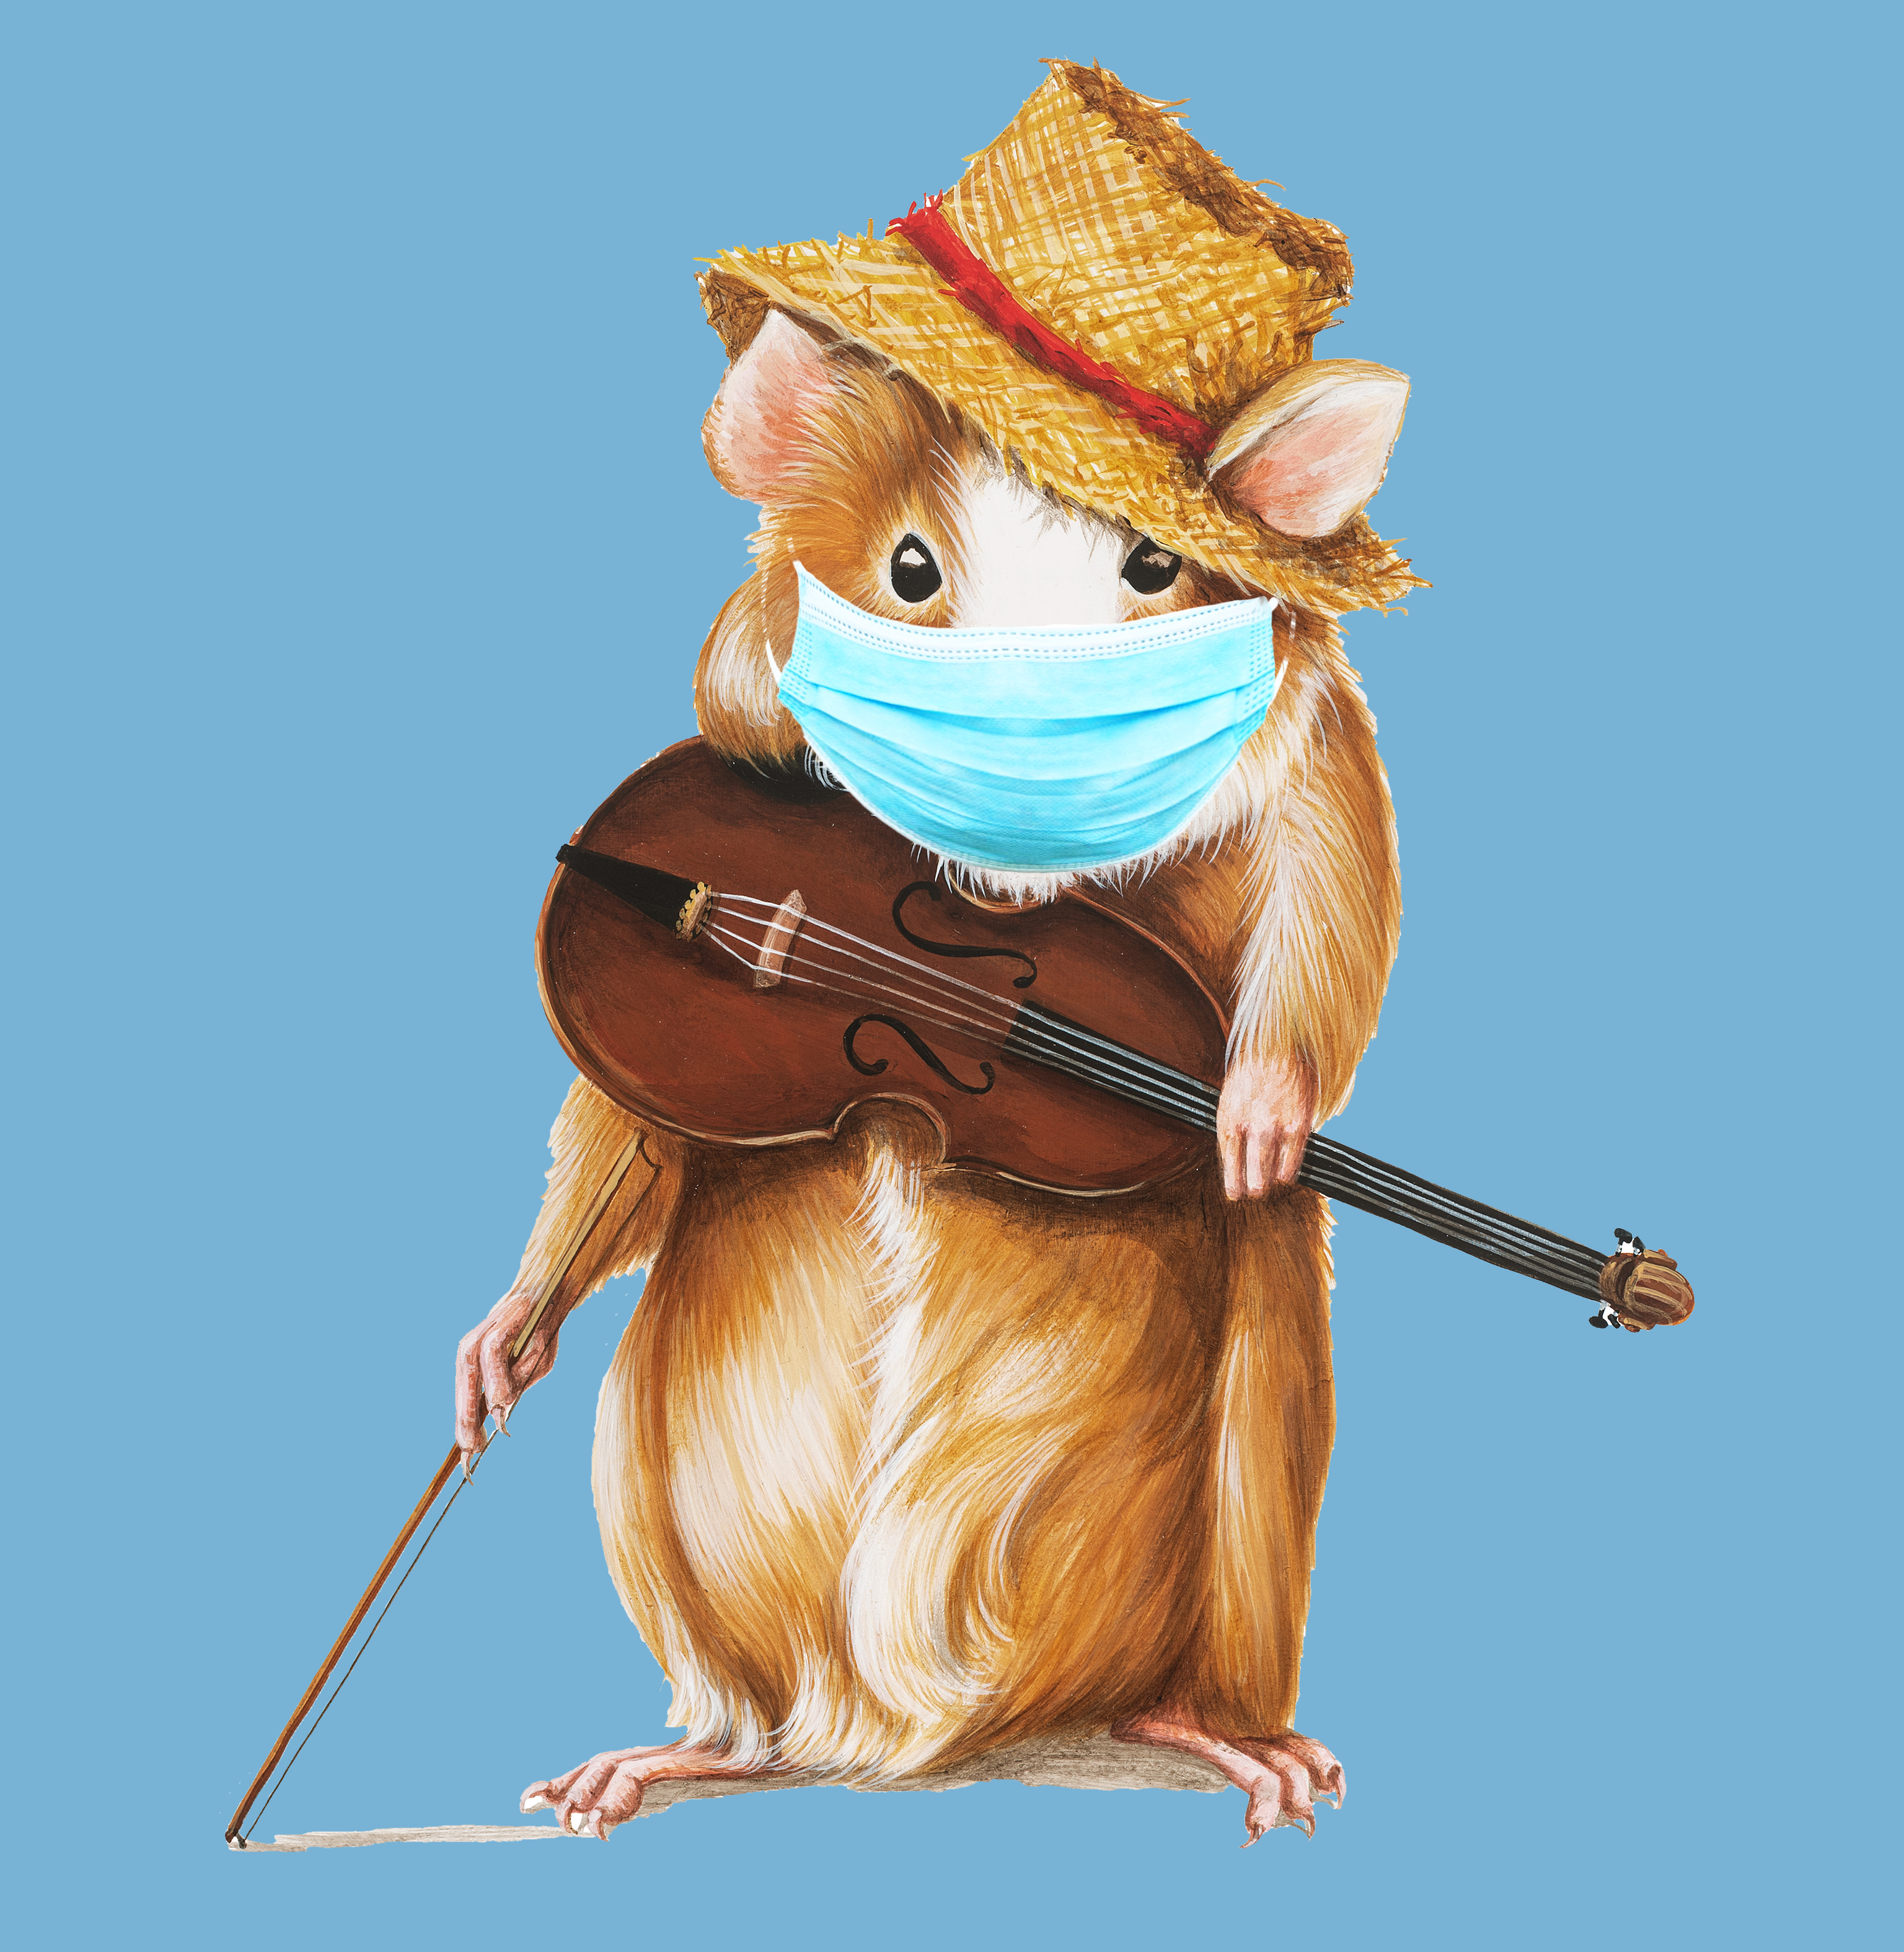 A caricature of Henri the Rat holding a fiddle and wearing a protective mask.